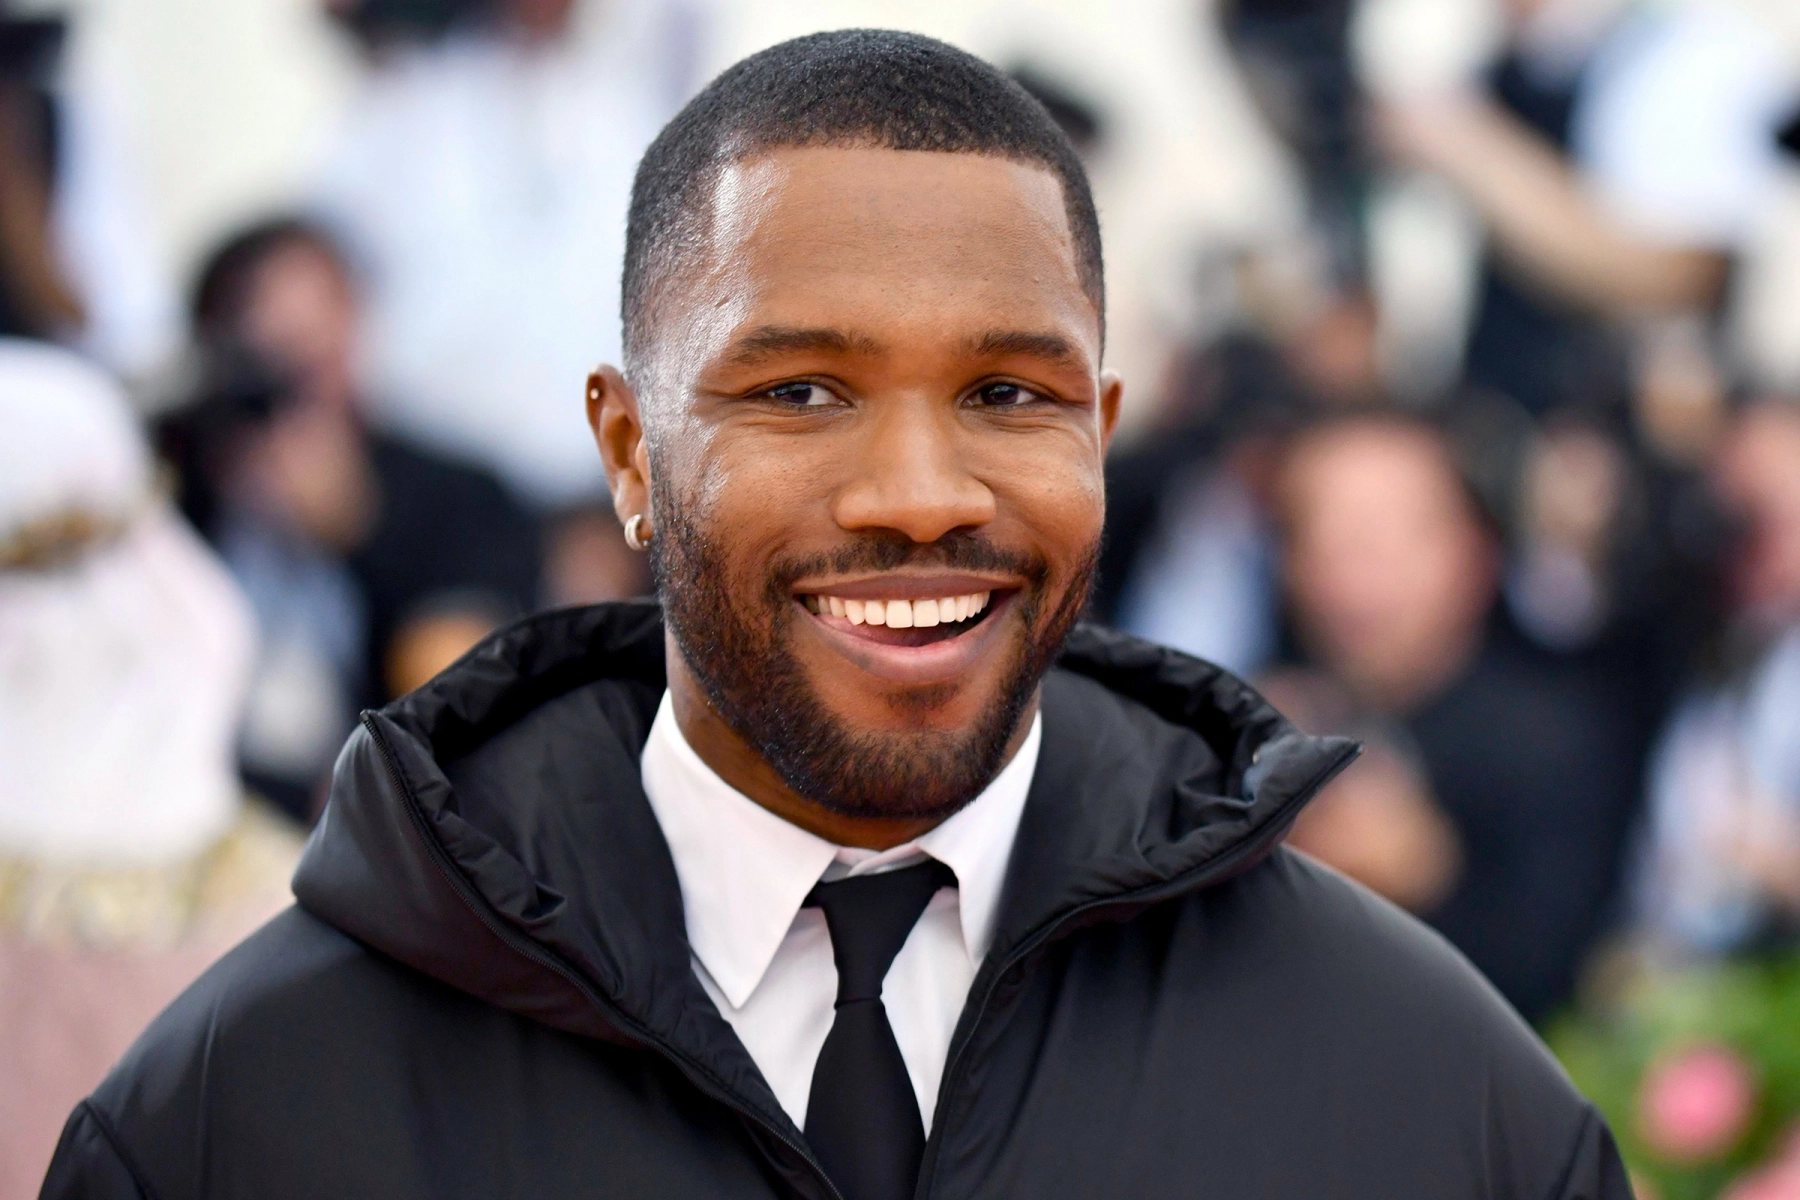 In this unearthed video, 17-YEAR-OLD FRANK OCEAN SINGS AT HIS HIGH SCHOOL GRADUATION